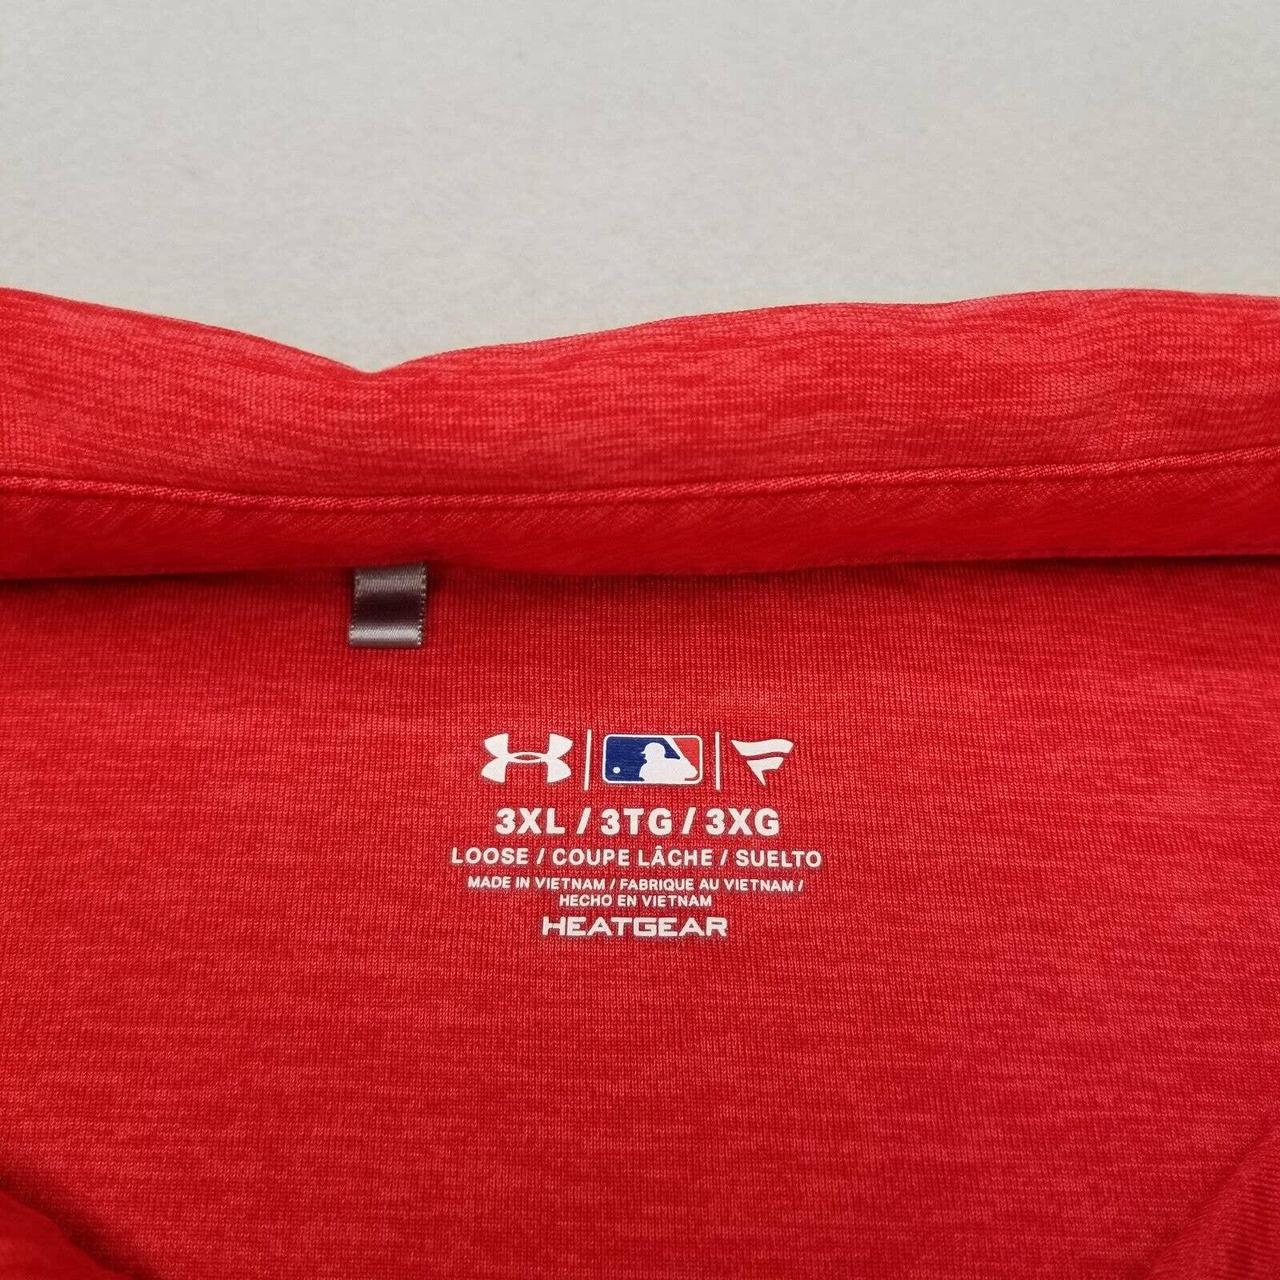 Under Armour Cool Switch MLB Boston Red Sox Polo - Depop